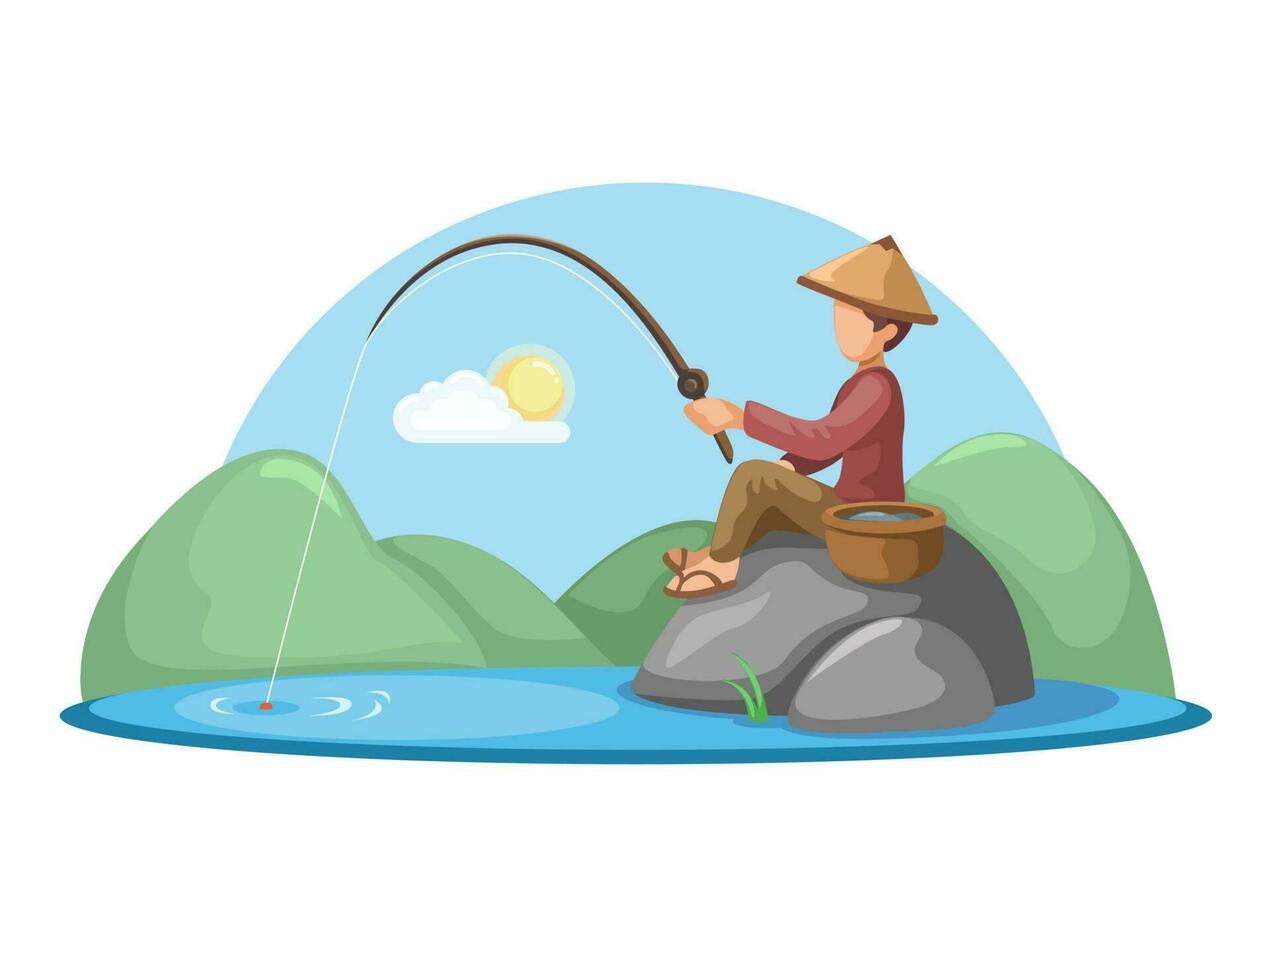 Asian Village Man Sitting On A Rock While Fishing in The Lake Cartoon illustration Vector